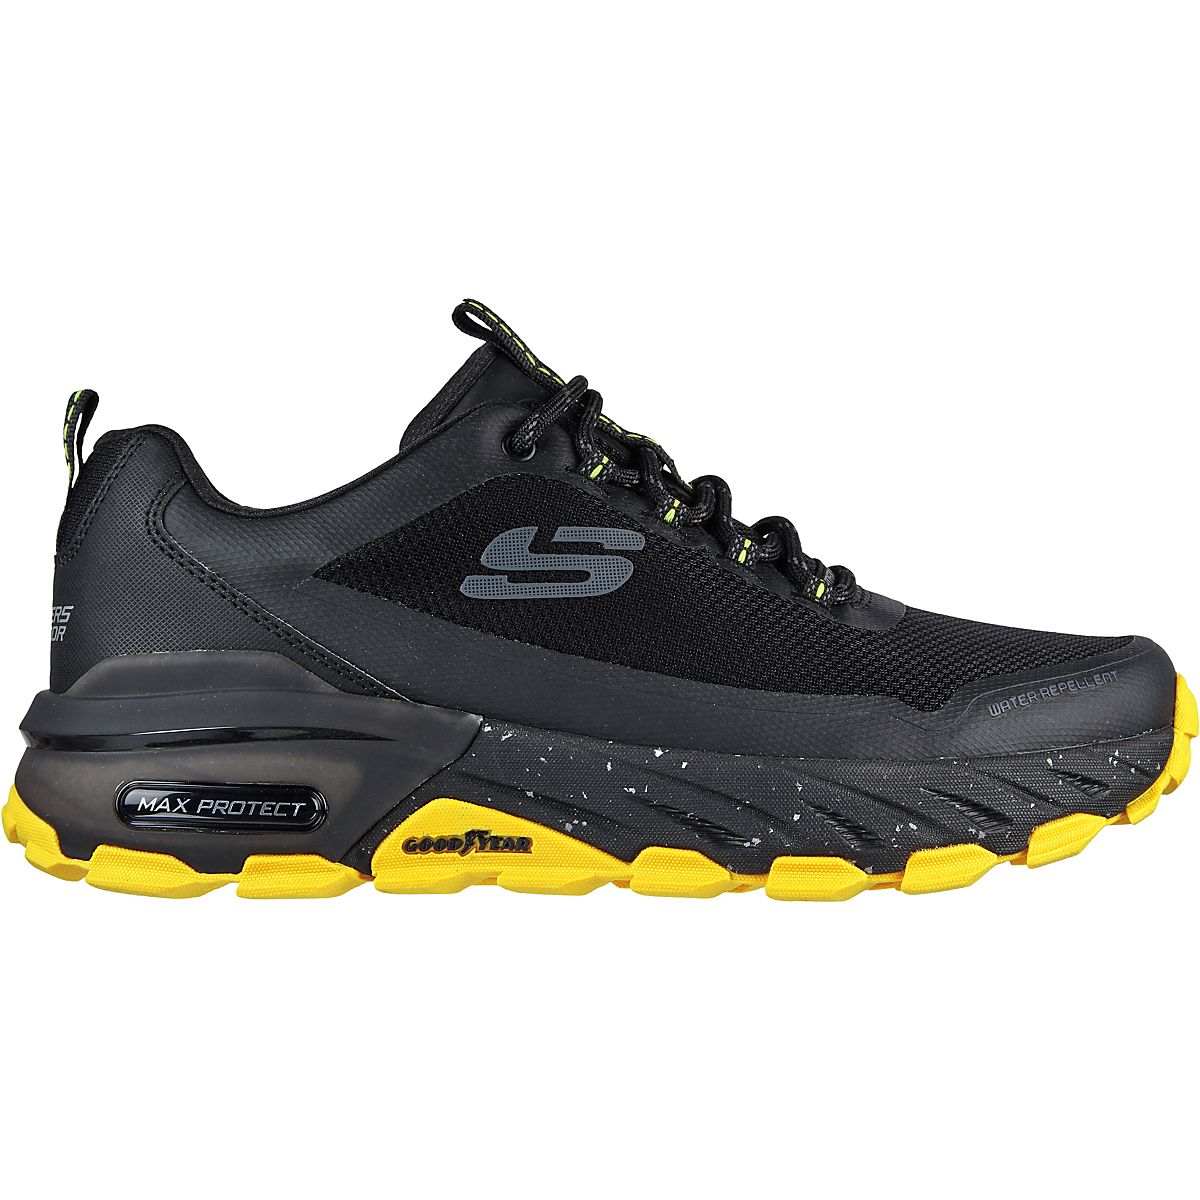 SKECHERS Men's Max Protect Liberated Shoes | Academy